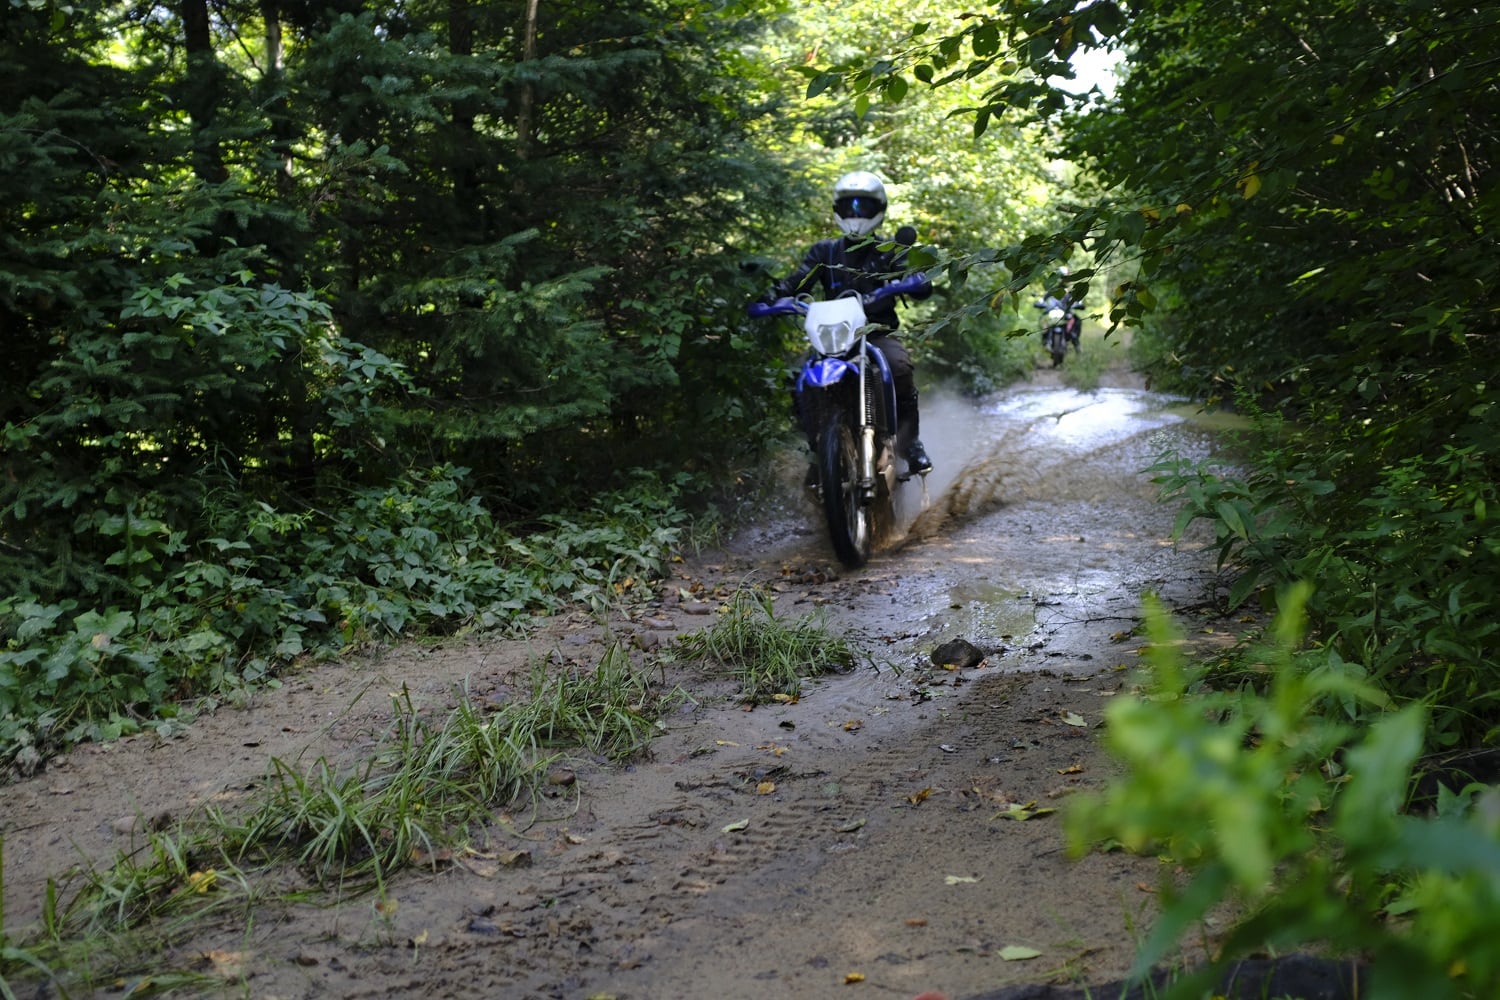 An ADV on a dirt trail in a forest.